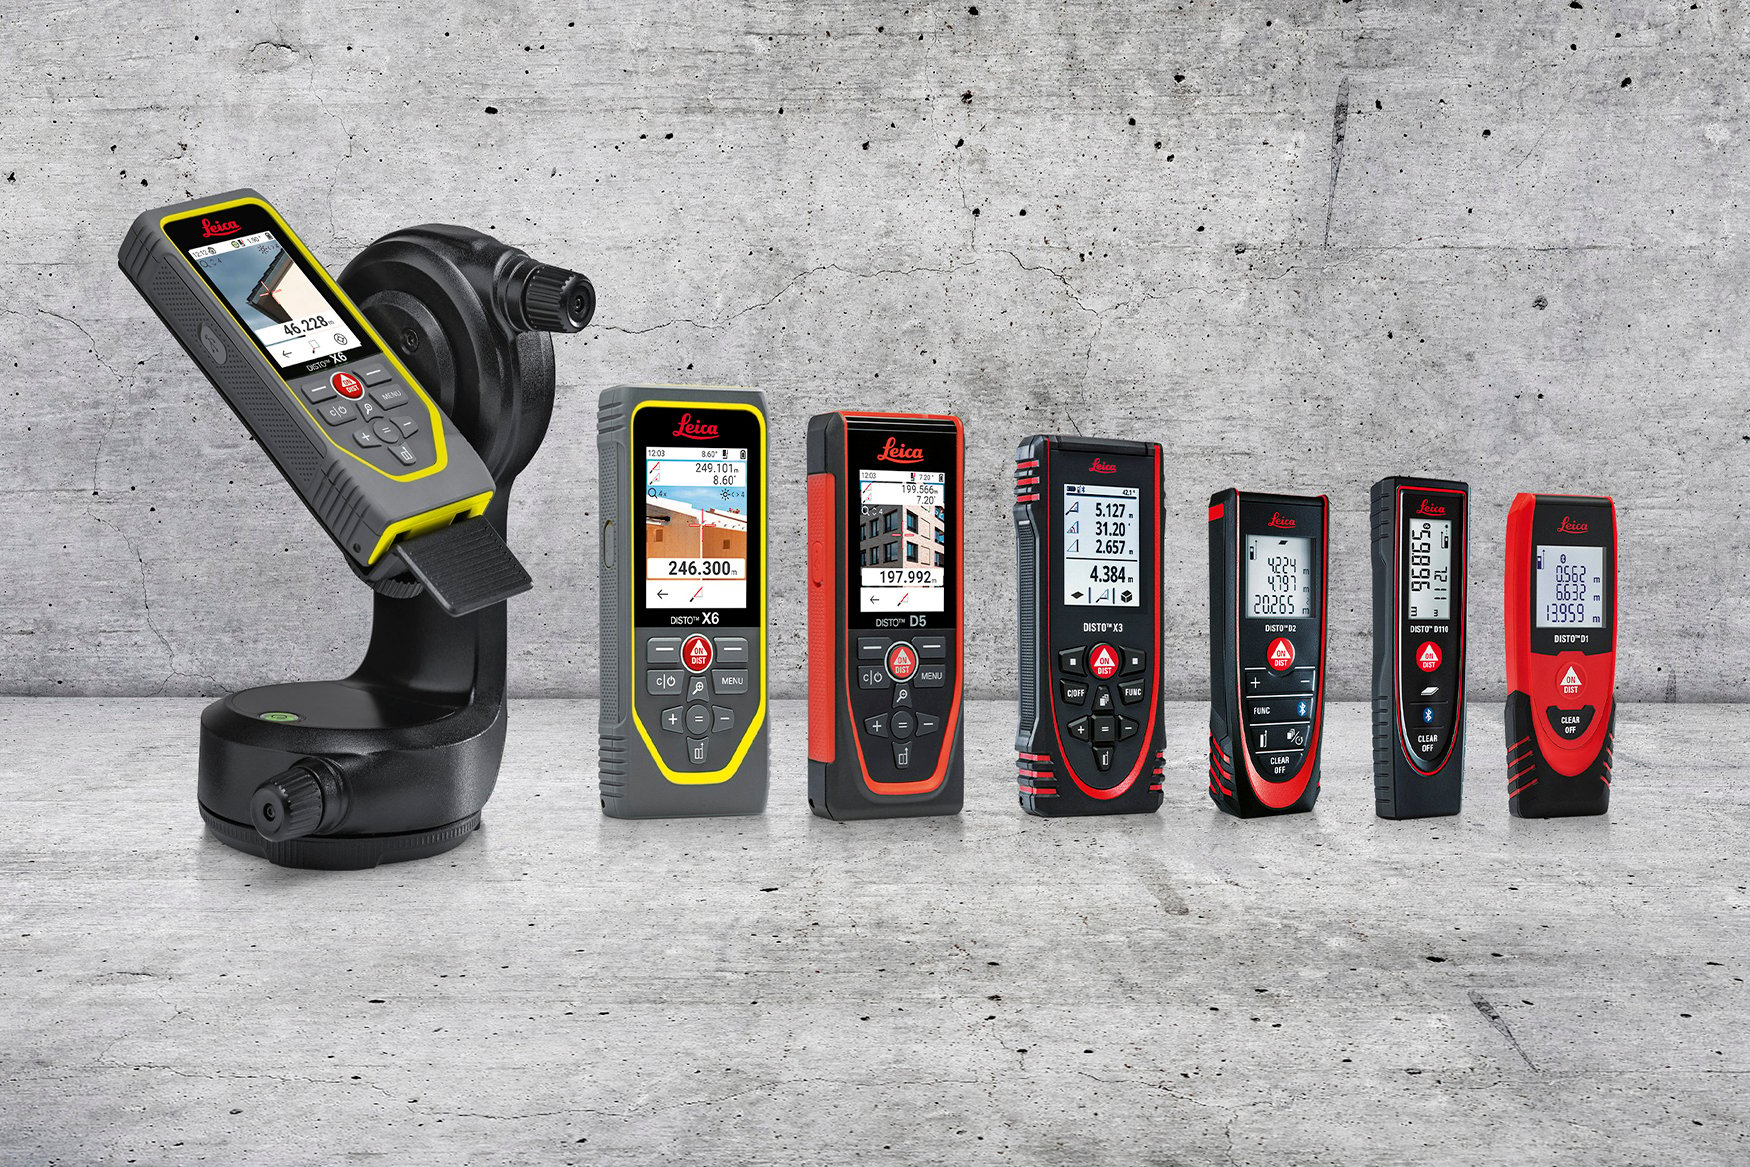 Leica DISTO series consisting of 6 laser measures with different functionality and size and the tripod adapter DST 360-X for P2P Technology